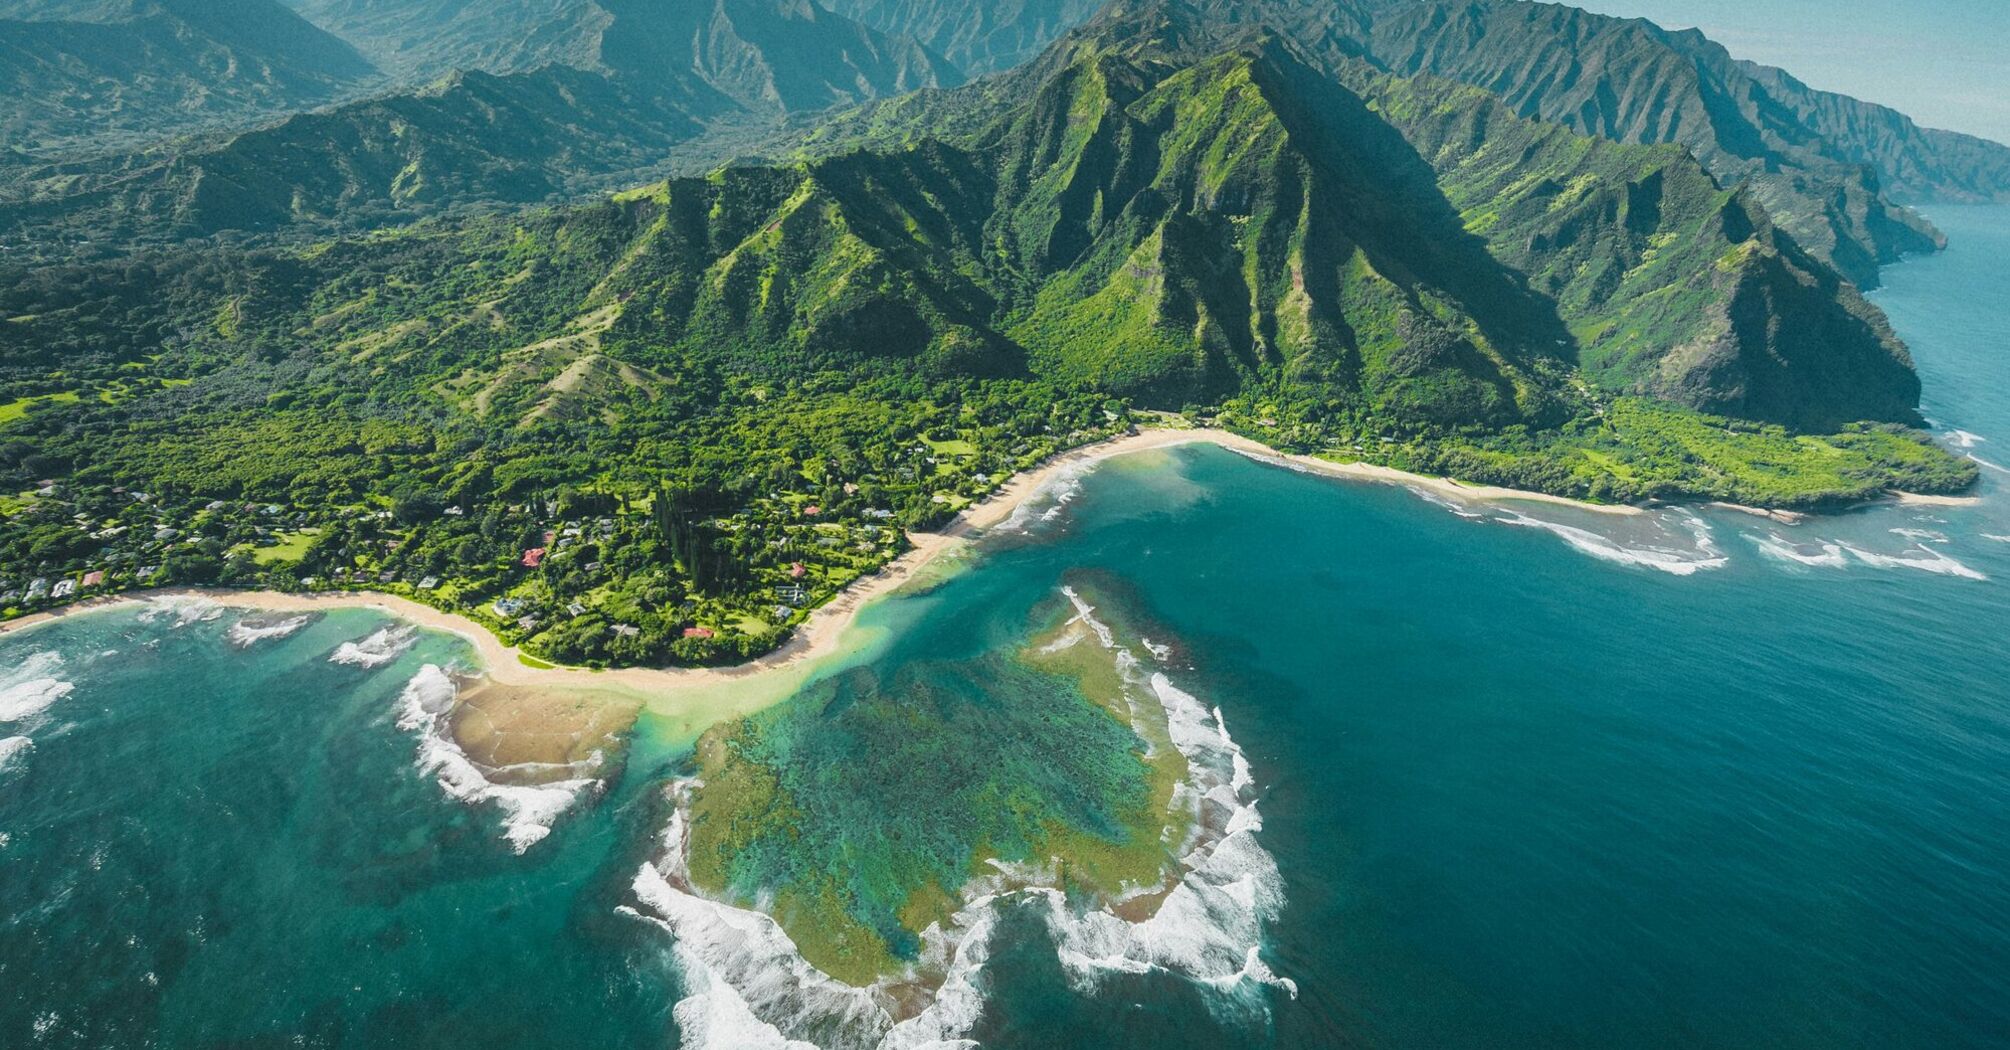 Aerial view of a lush Hawaiian coastline with mountains, beach, and clear blue waters